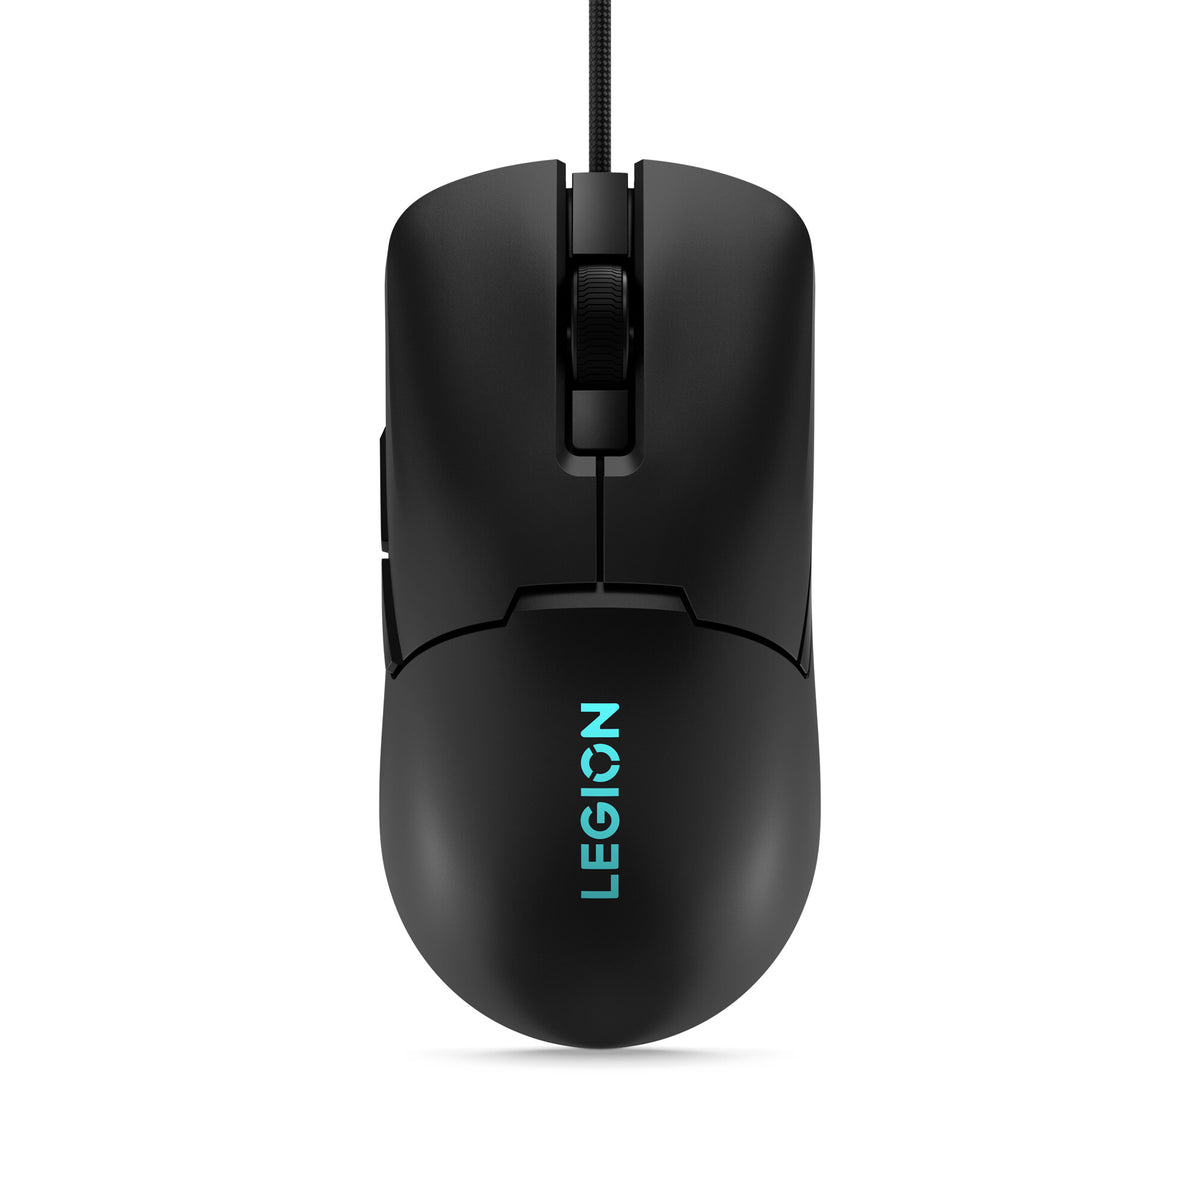 Lenovo Legion M300s - Wired USB Type-A Optical Gaming Mouse in Black - 8,000 DPI